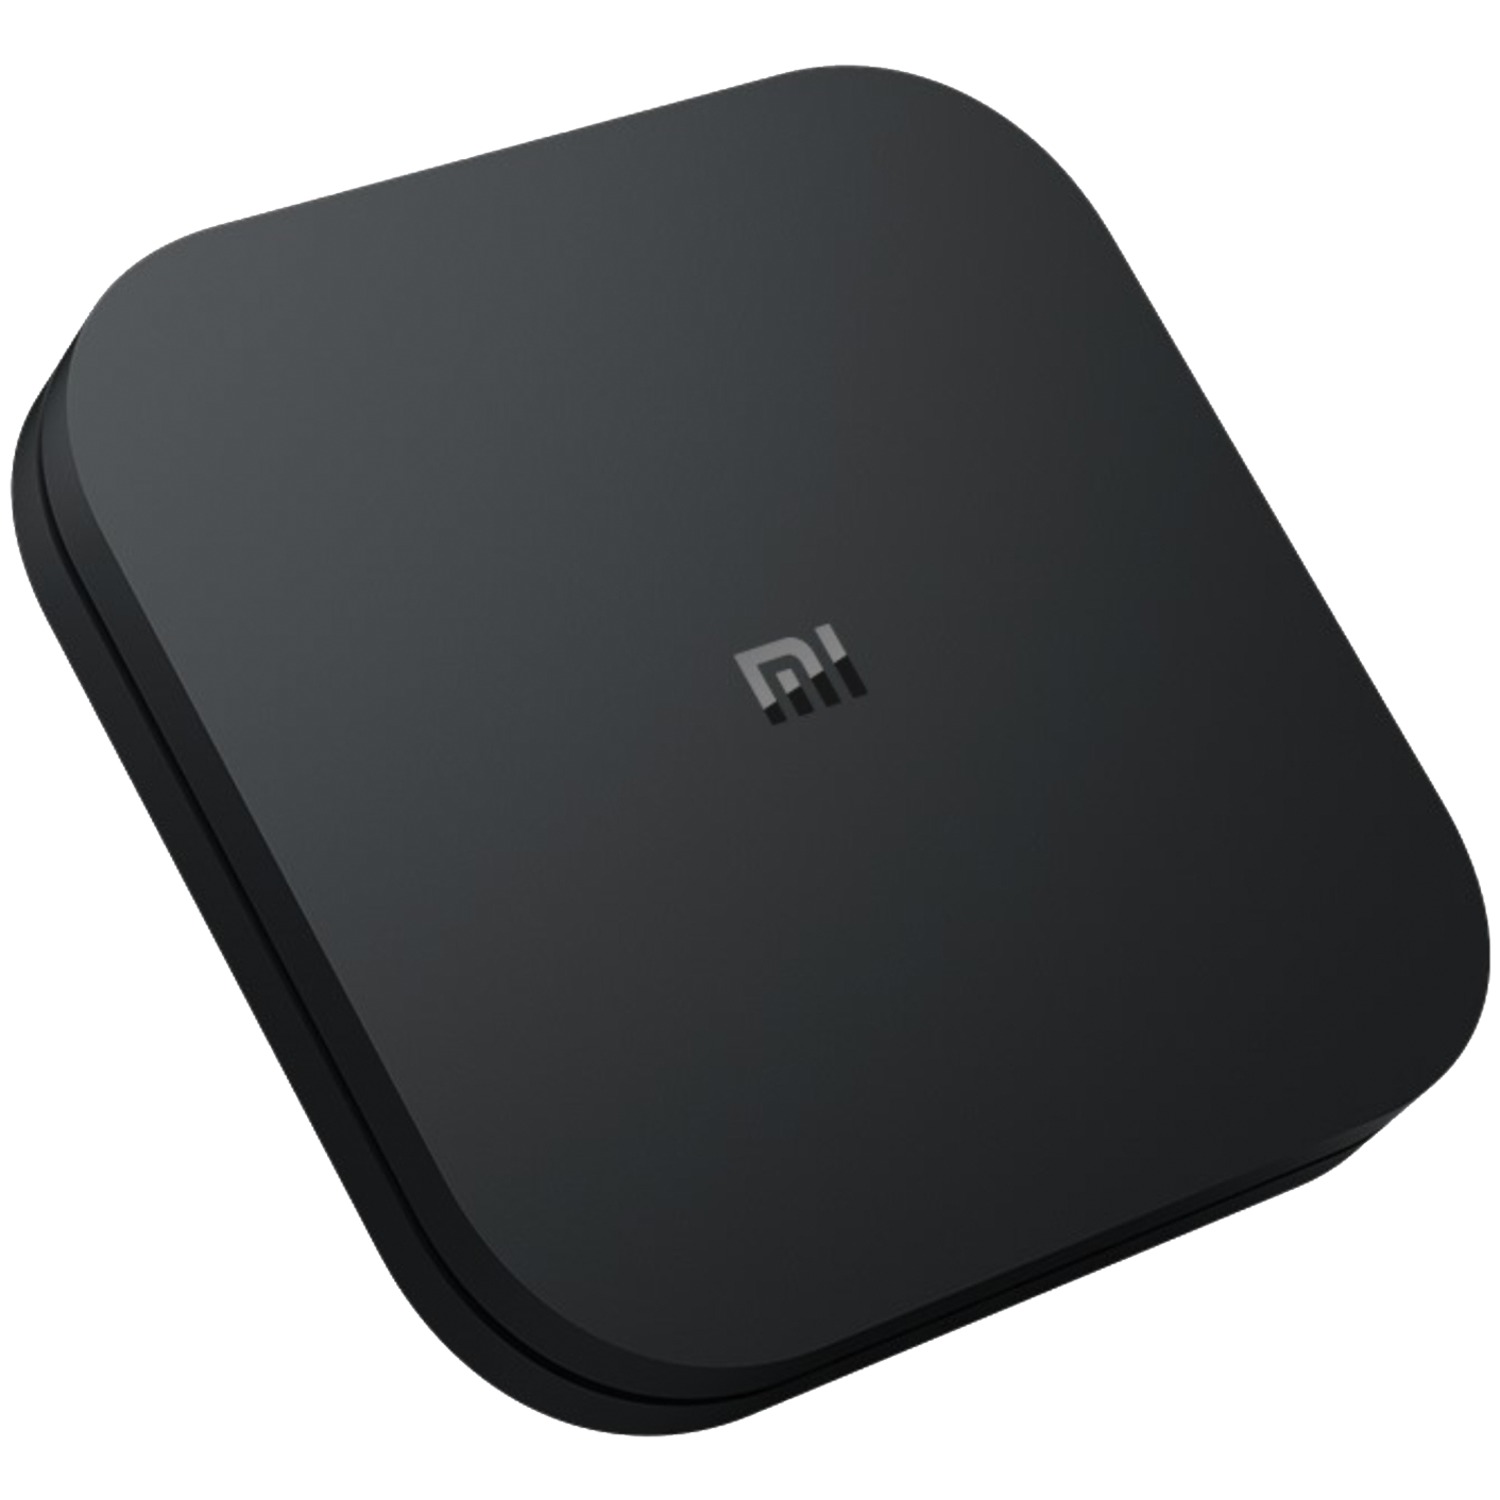 Xiaomi Mi Box S 4K HDR Android TV with Google Assistant Remote Streaming Media Player - image 3 of 8